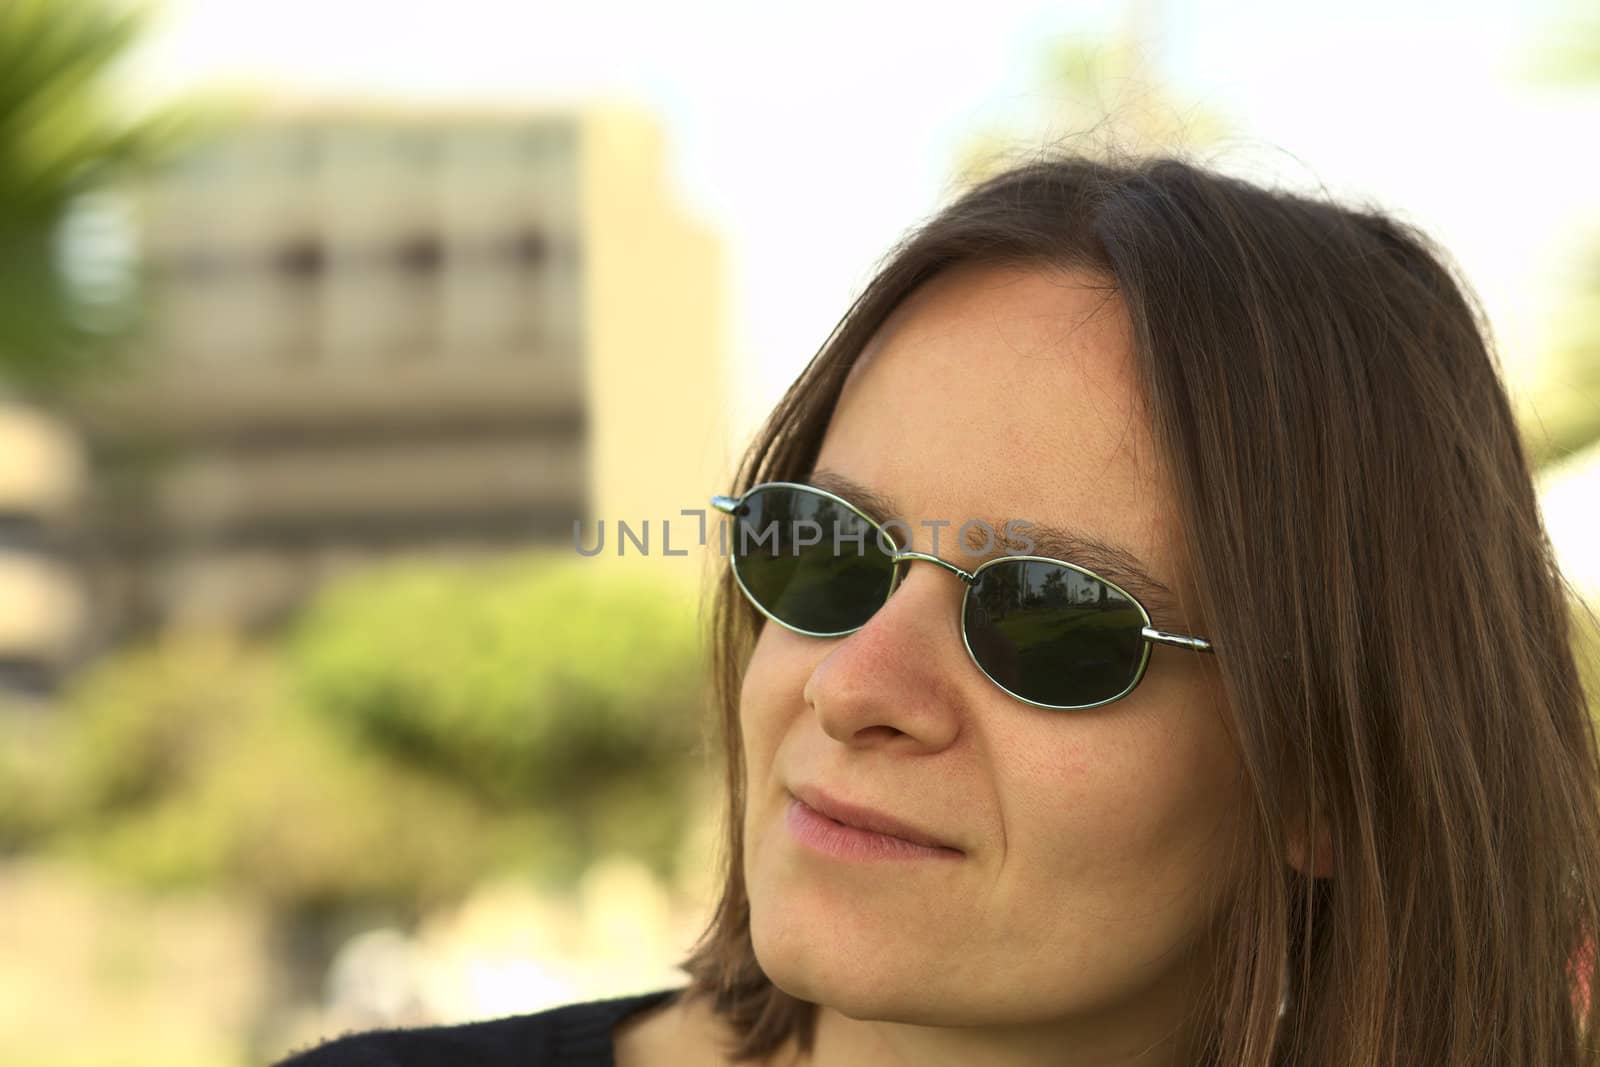 Portrait of a young woman in sunglasses with a building and trees in the background (Selective Focus, Focus on the left eyebrow and sunglasses)